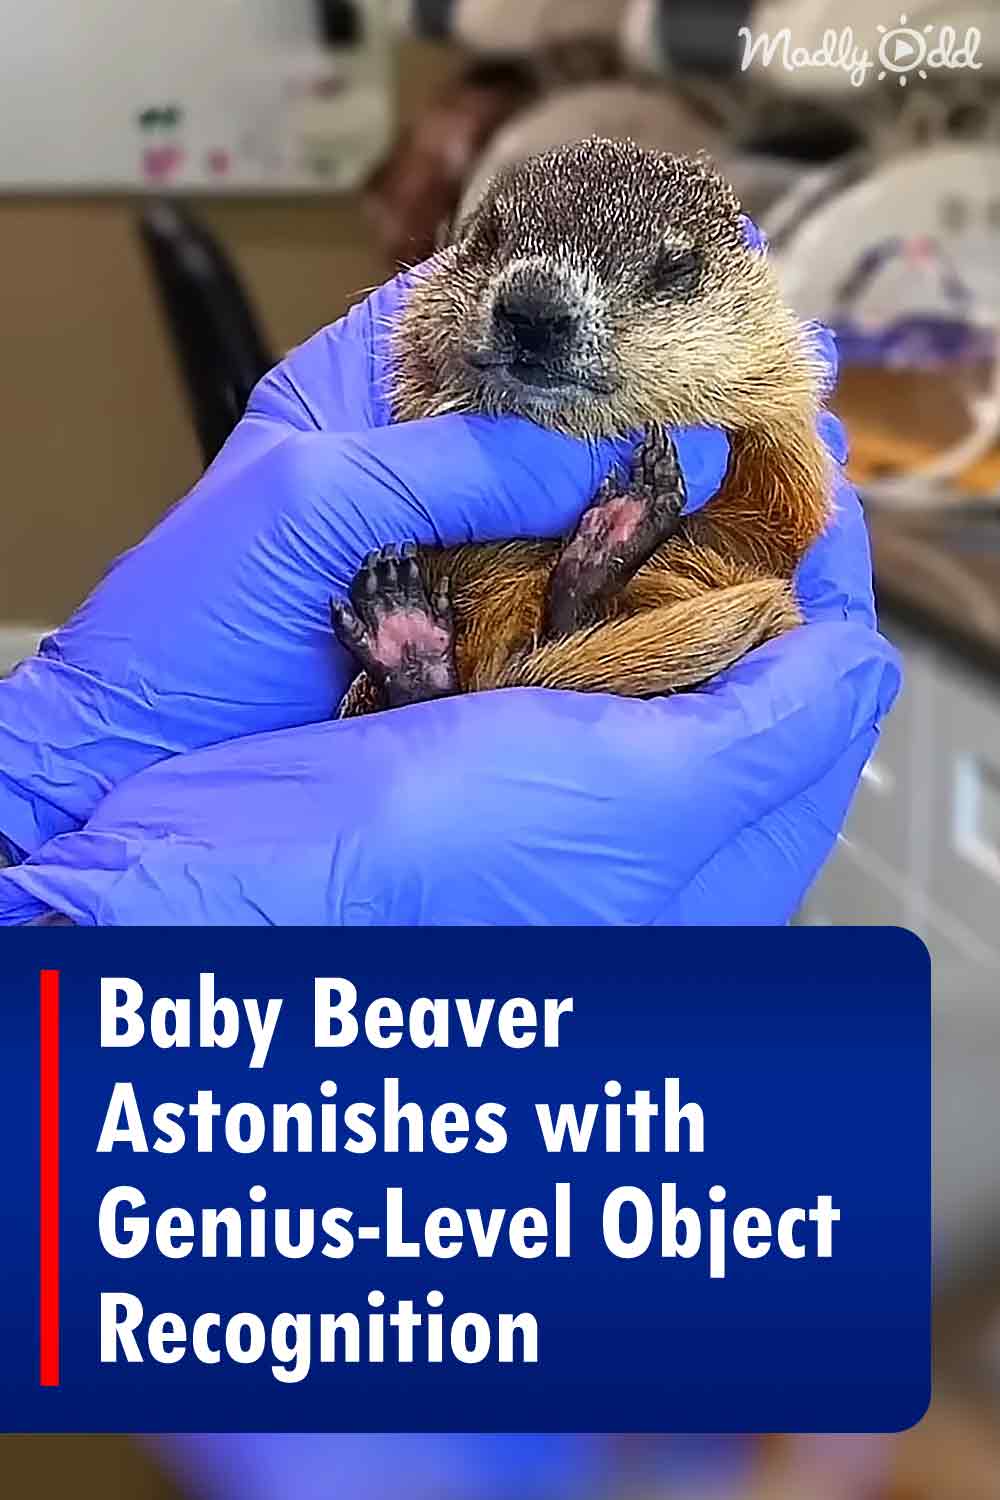 Baby Beaver Astonishes with Genius-Level Object Recognition